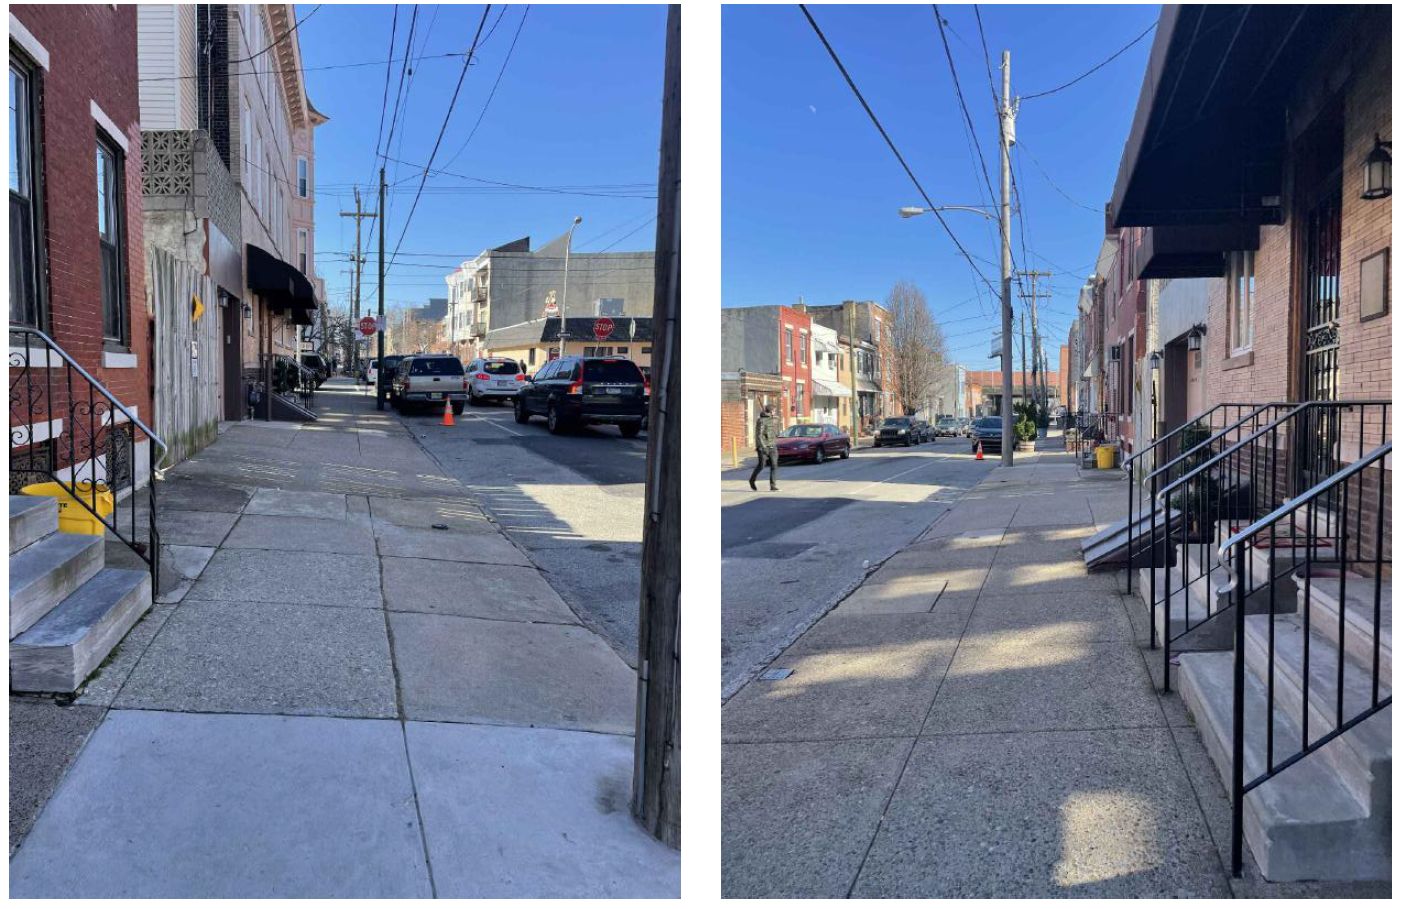 138-40 Tasker Street. Site conditions prior to redevelopment. Looking west (left) and east (right). Credit: Fusa Designs via the Department of Planning and Development of the City of Philadelphia